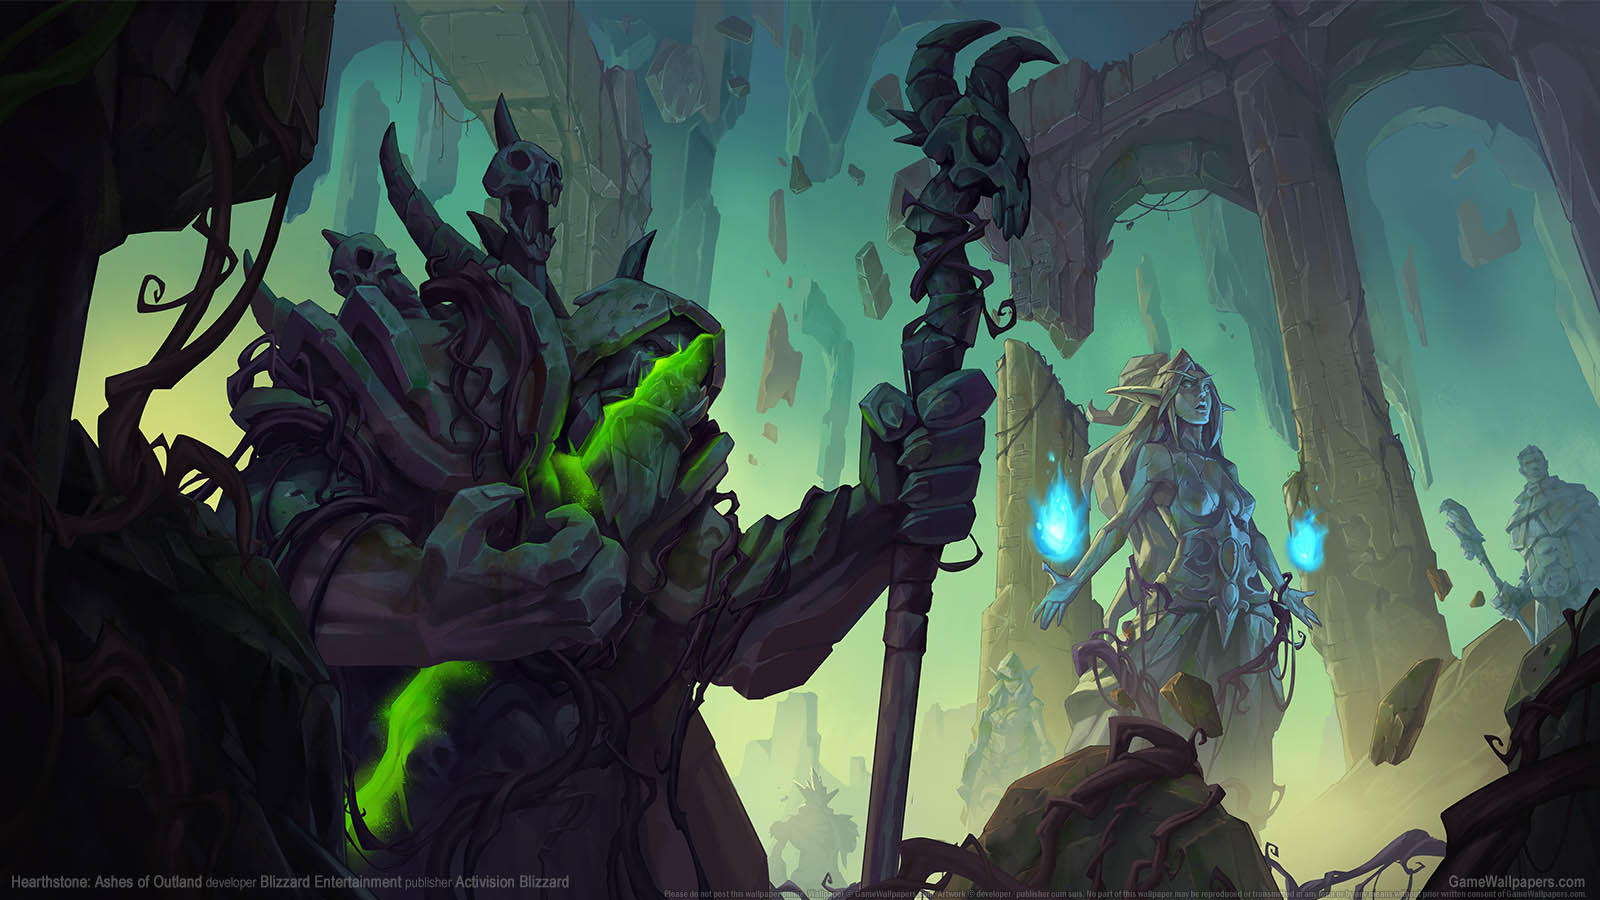 Hearthstone: Ashes of Outland fond d'cran 01 1600x900